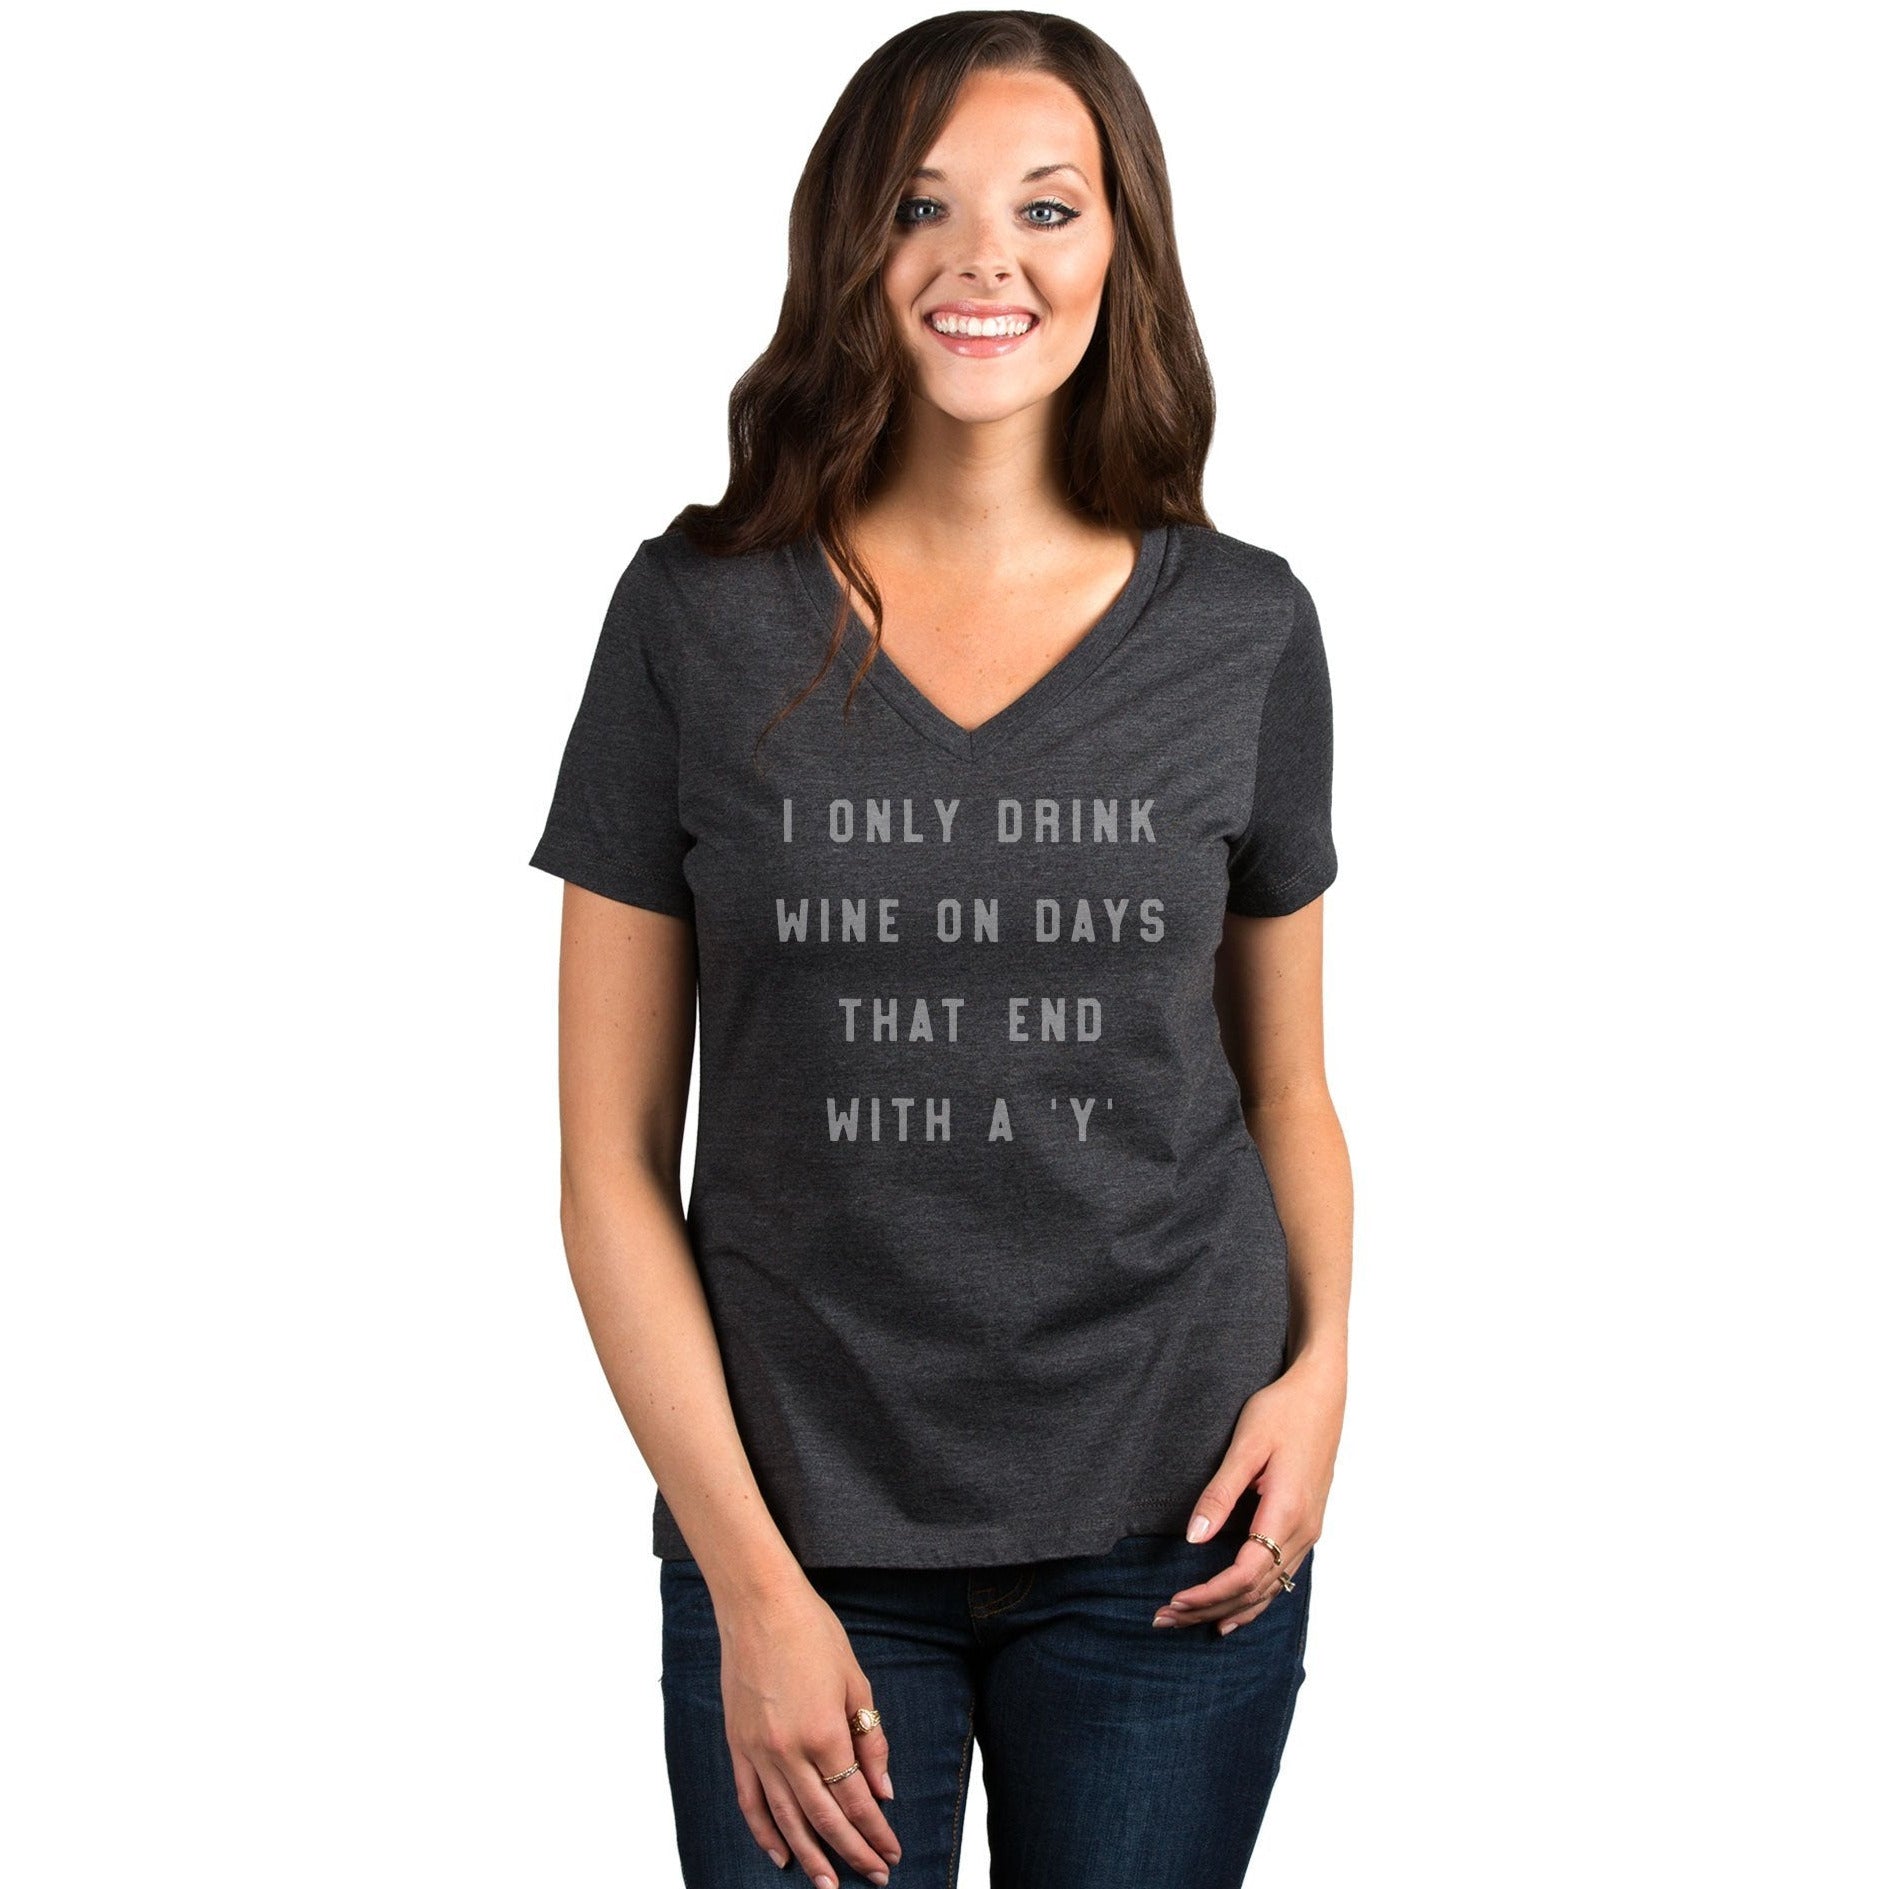 Drink Wine On Days Ends With Y Women's Relaxed Crewneck T-Shirt Top Tee Charcoal Grey Model